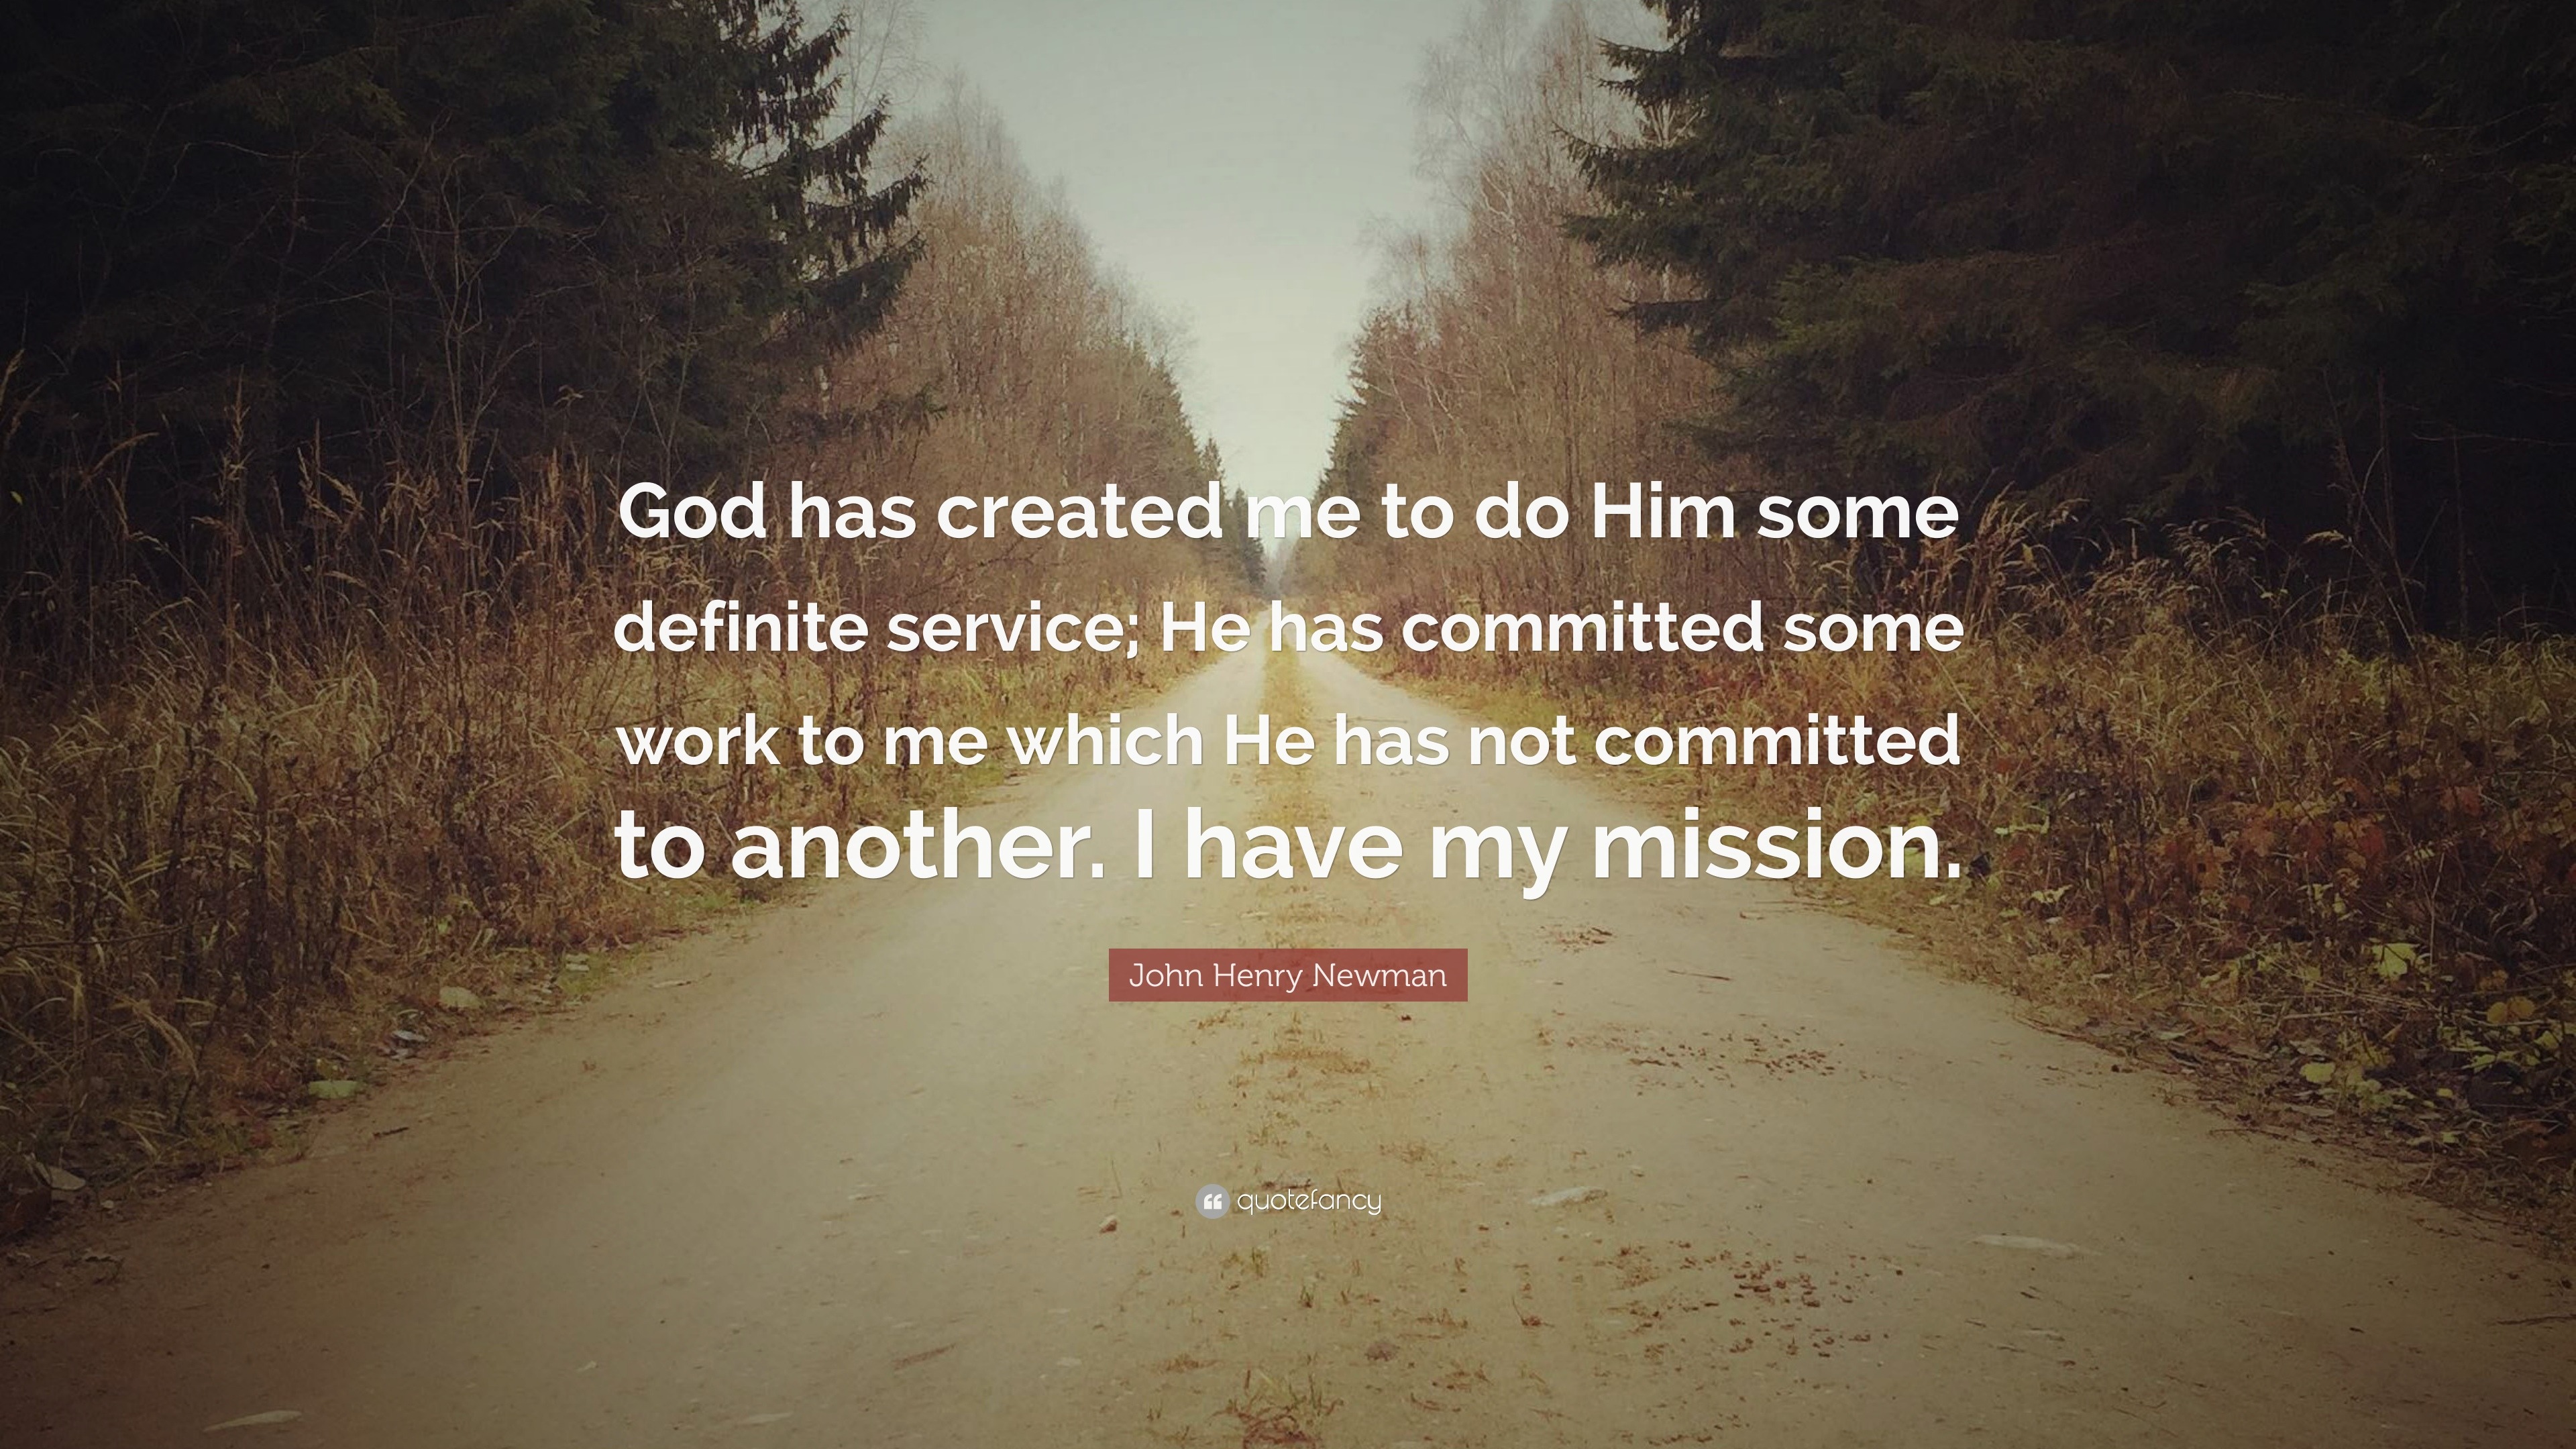 John Henry Newman Quote God Has Created Me To Do Him Some Definite Service He Has Committed Some Work To Me Which He Has Not Committed To Anoth